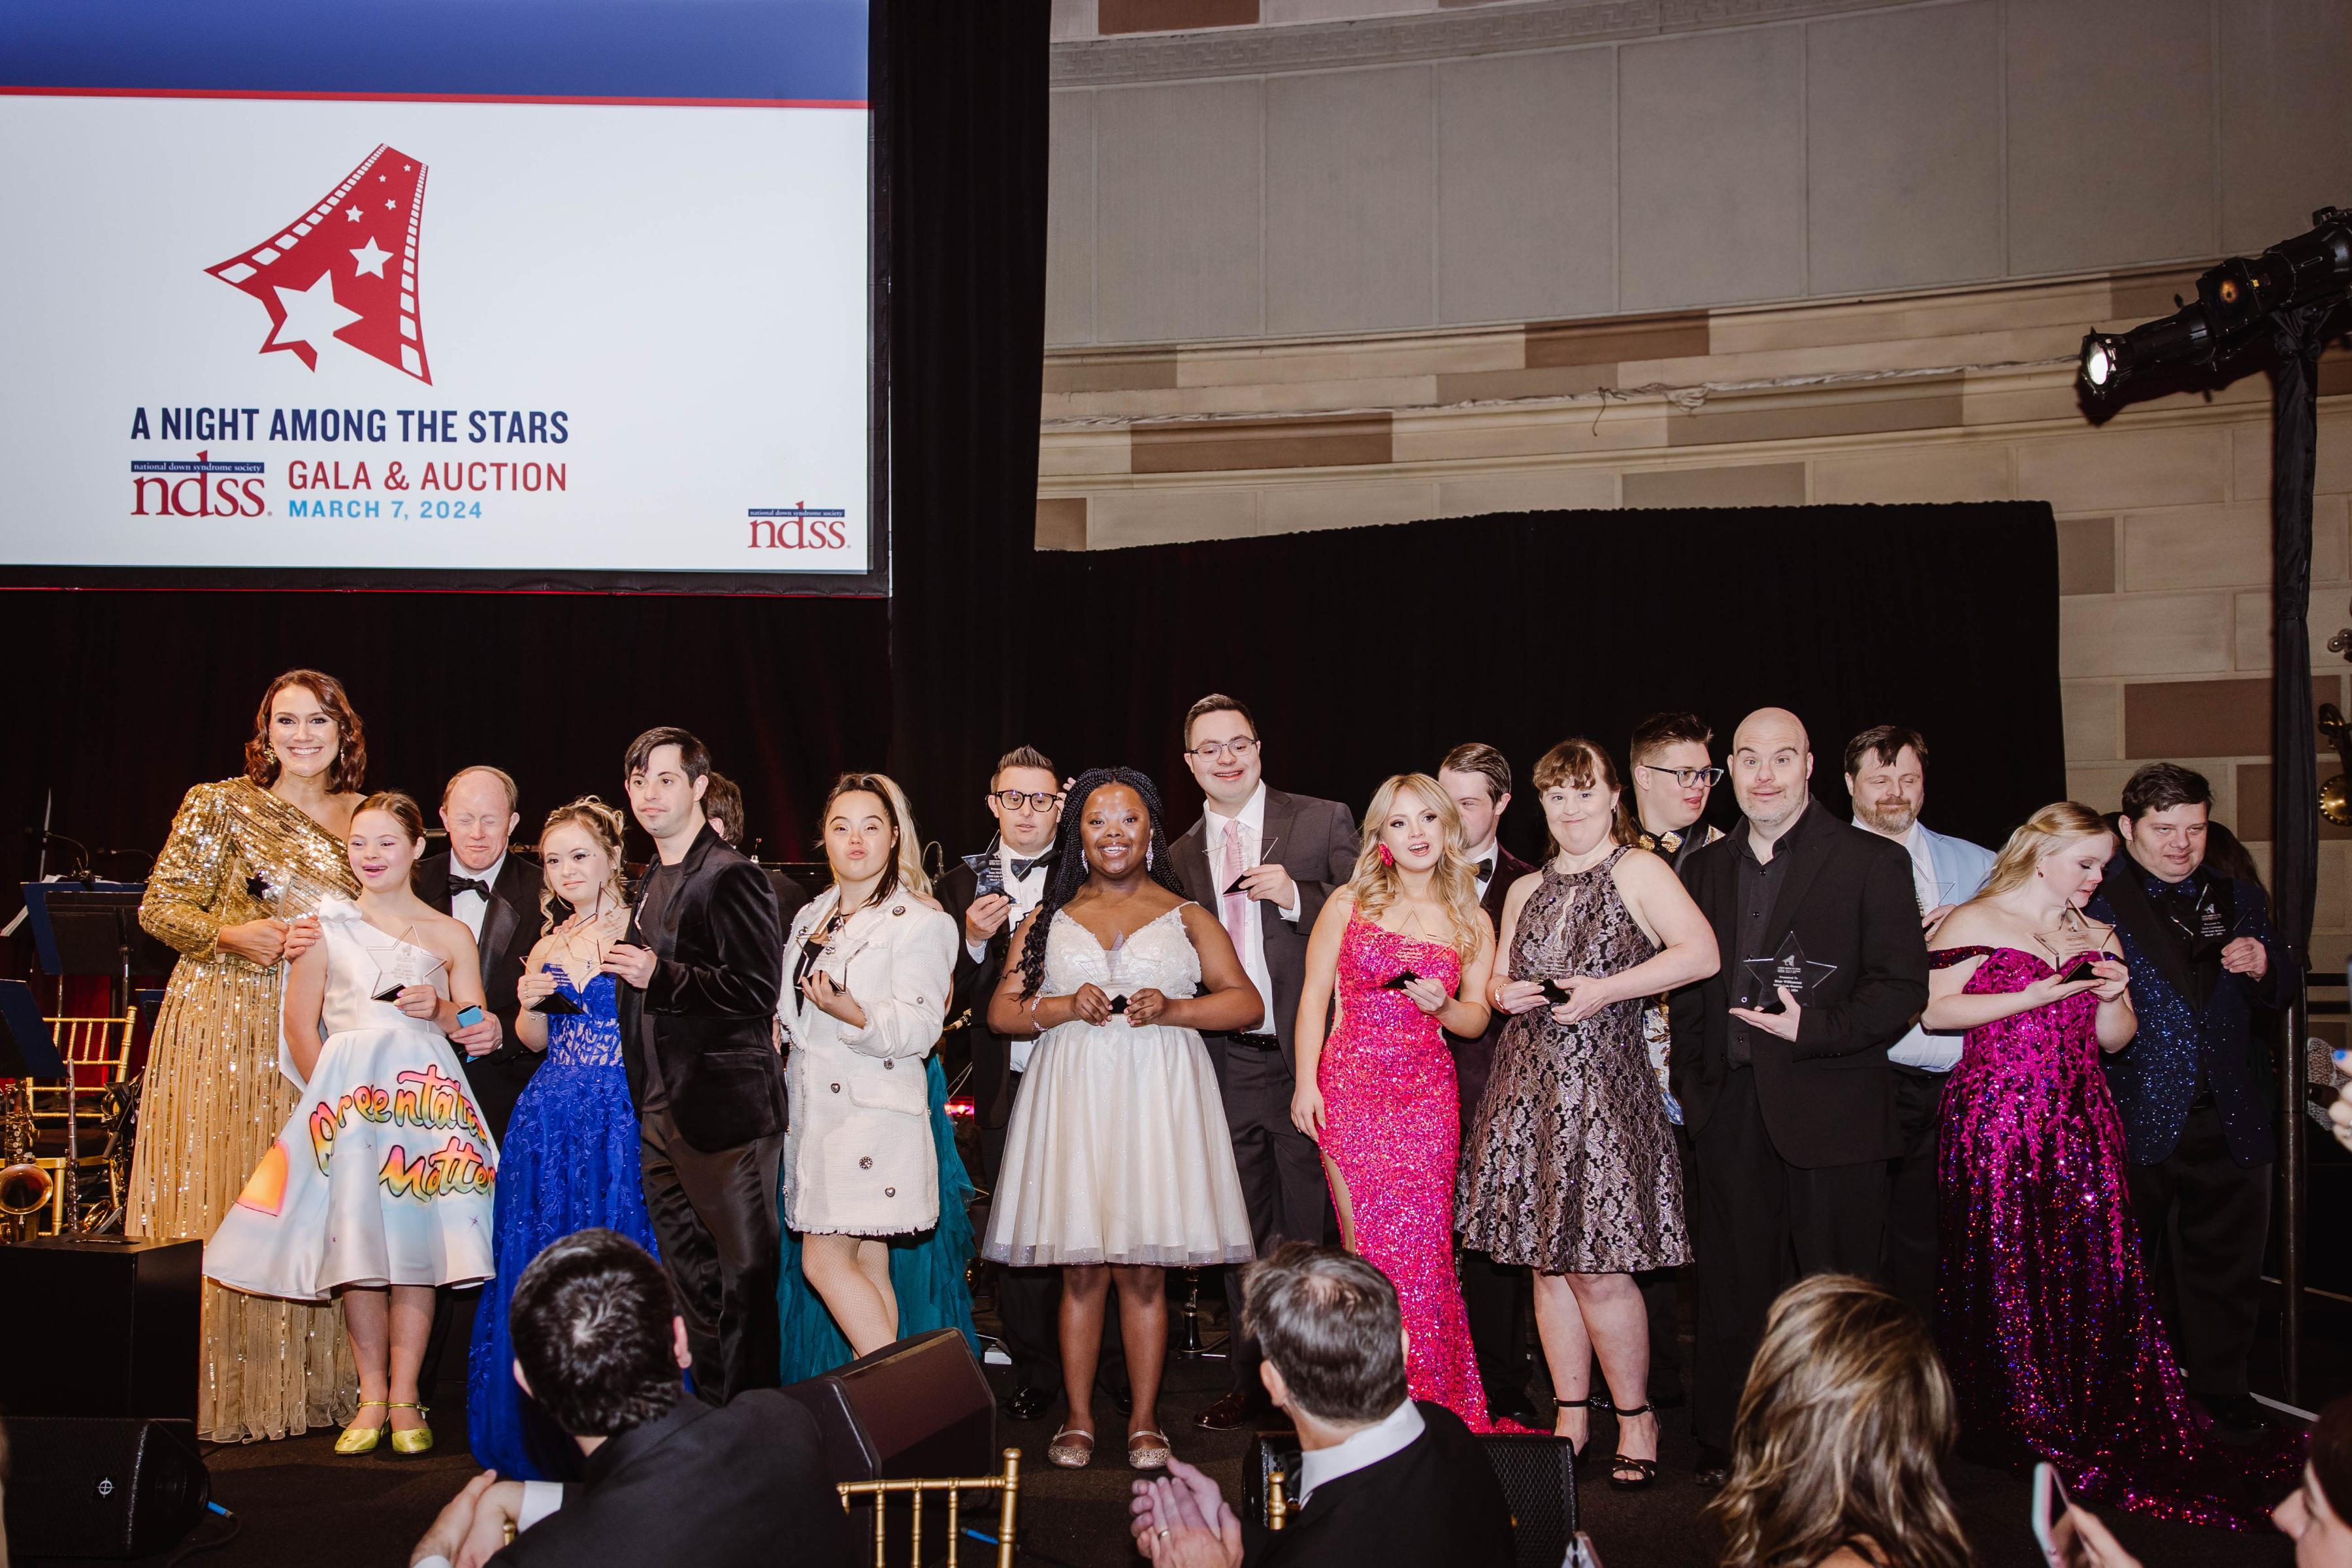 group of individuals with Down syndrome (18 people) honored on stage at NDSS gala